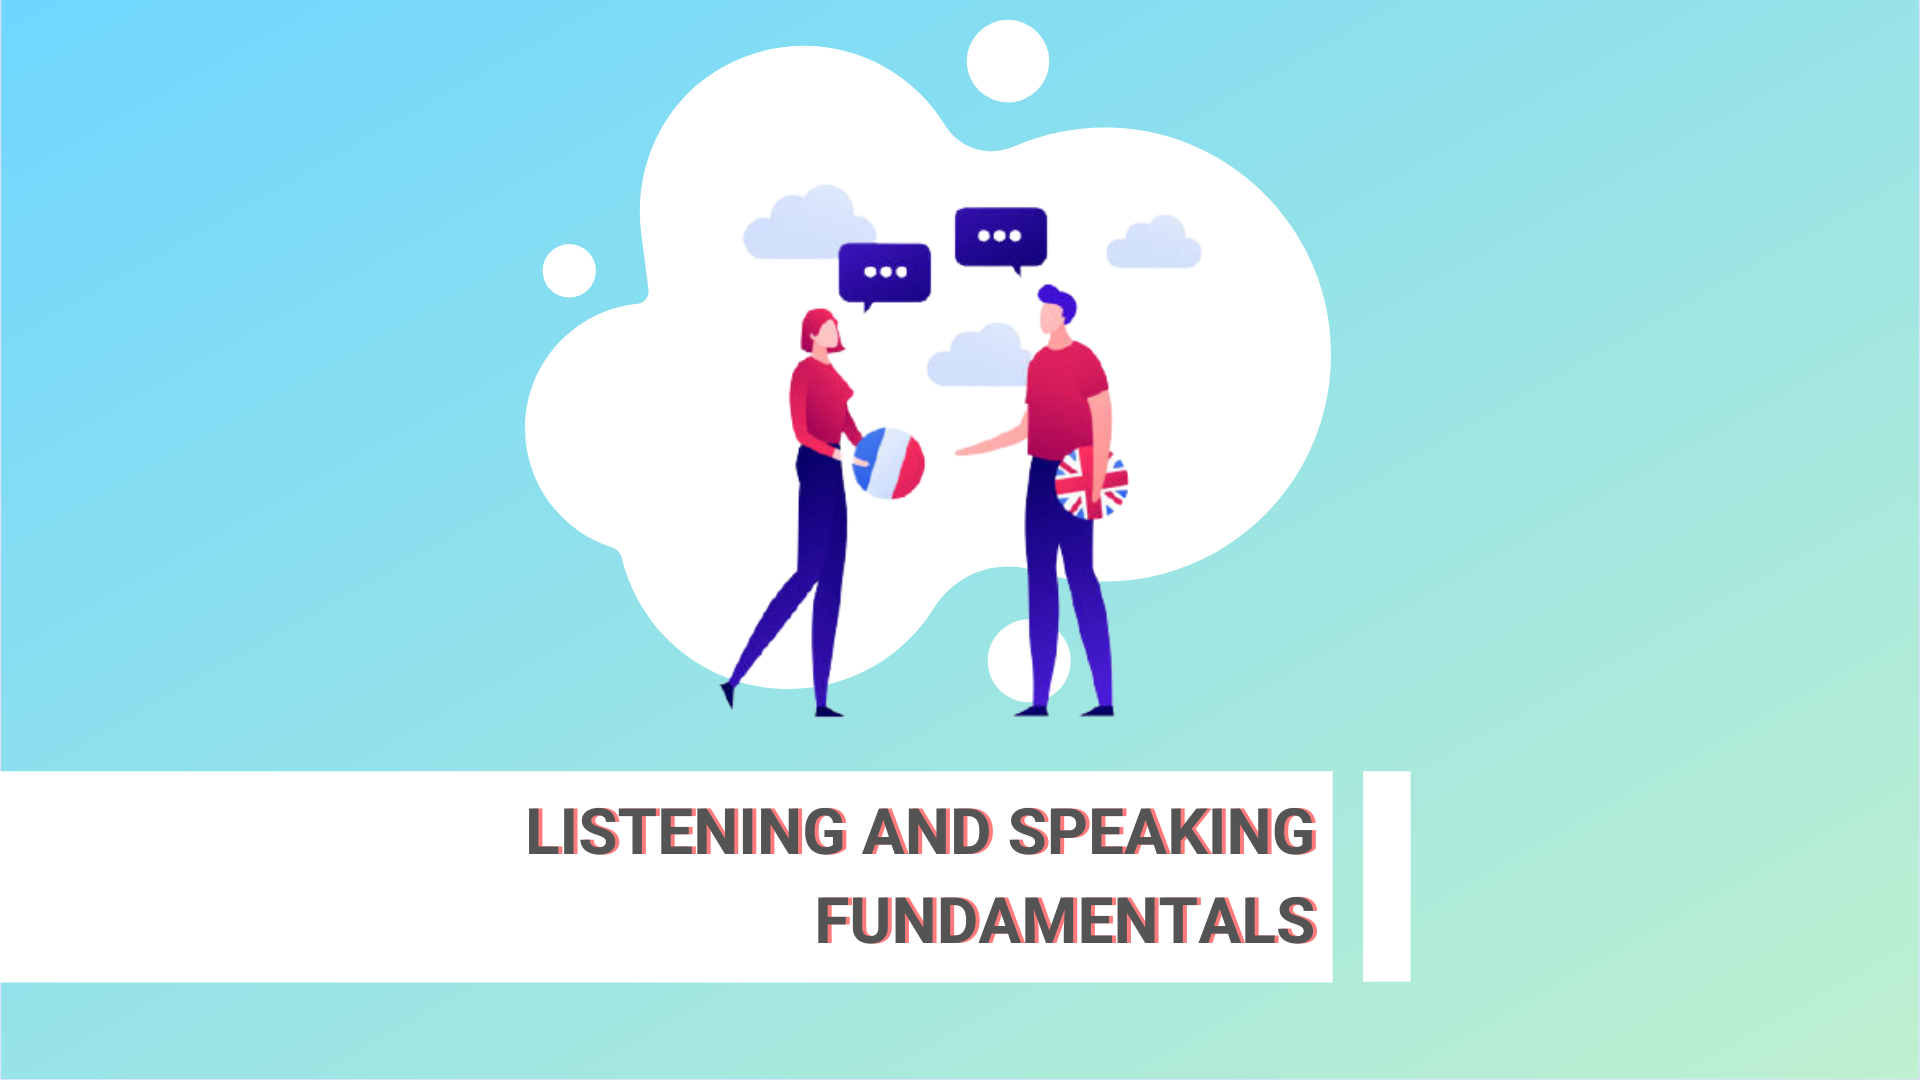 Fundamentals of listening and speaking course image